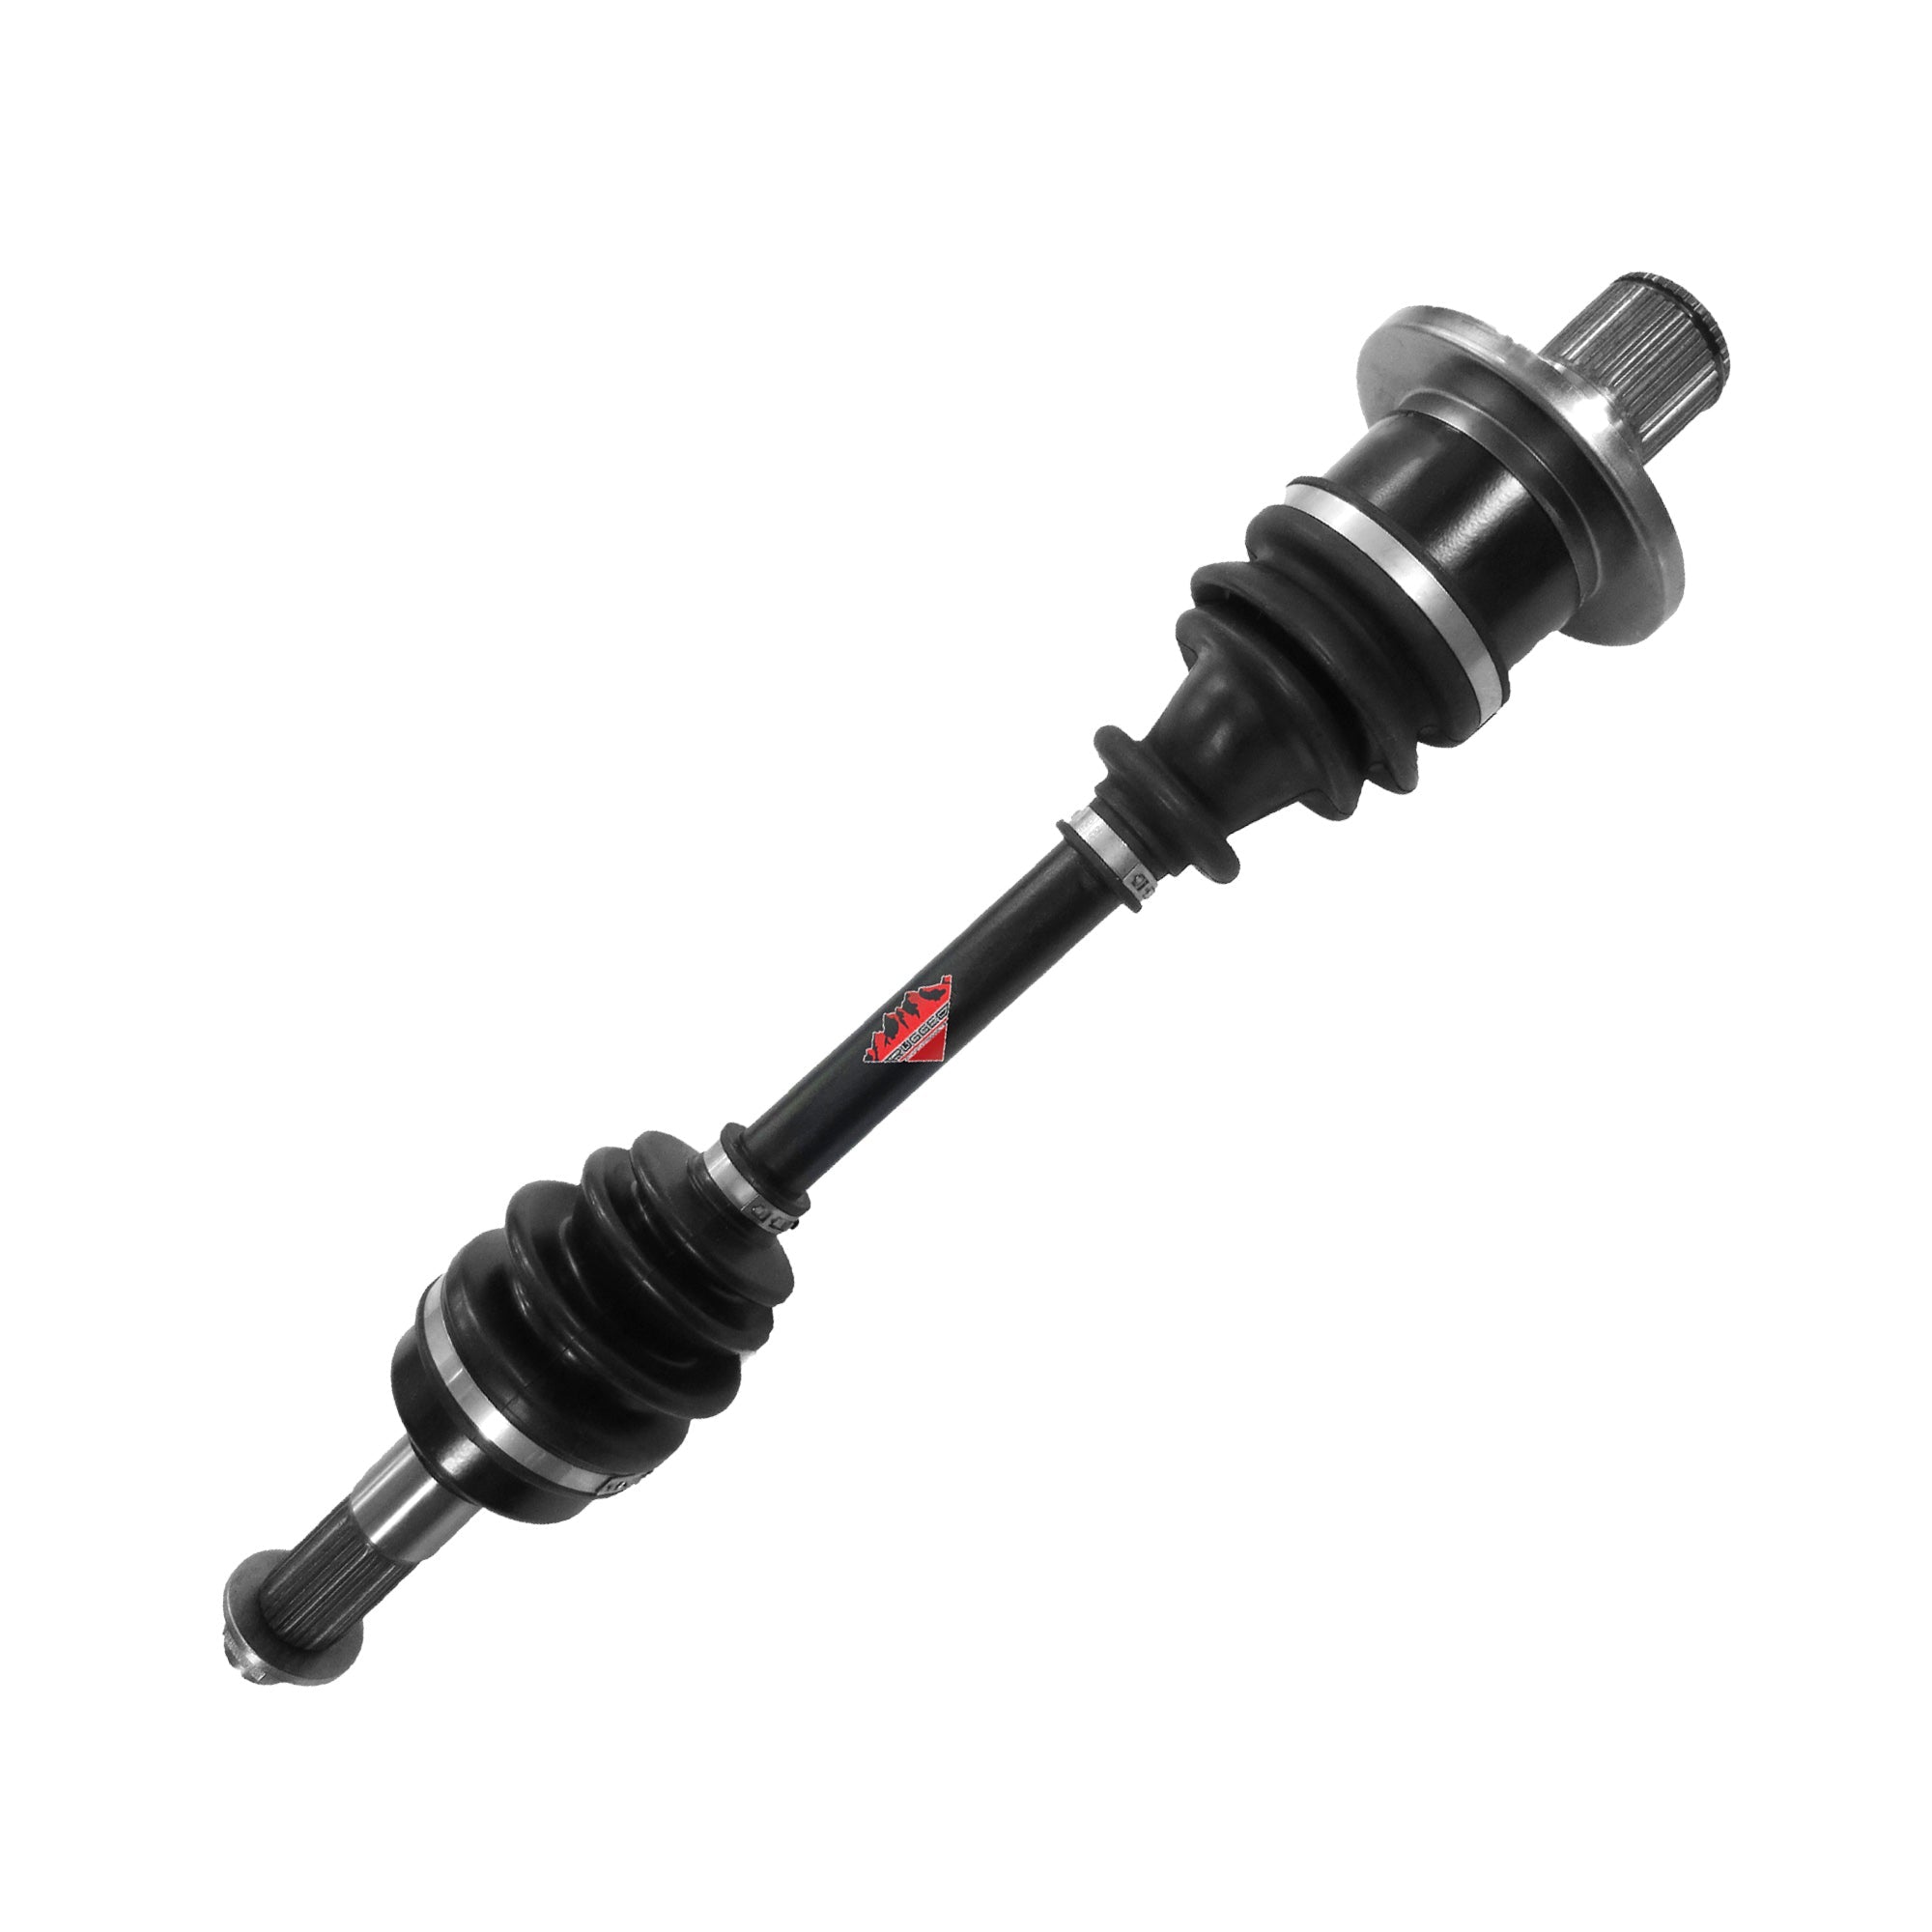 Performance Axle for CFMOTO UFORCE 800 